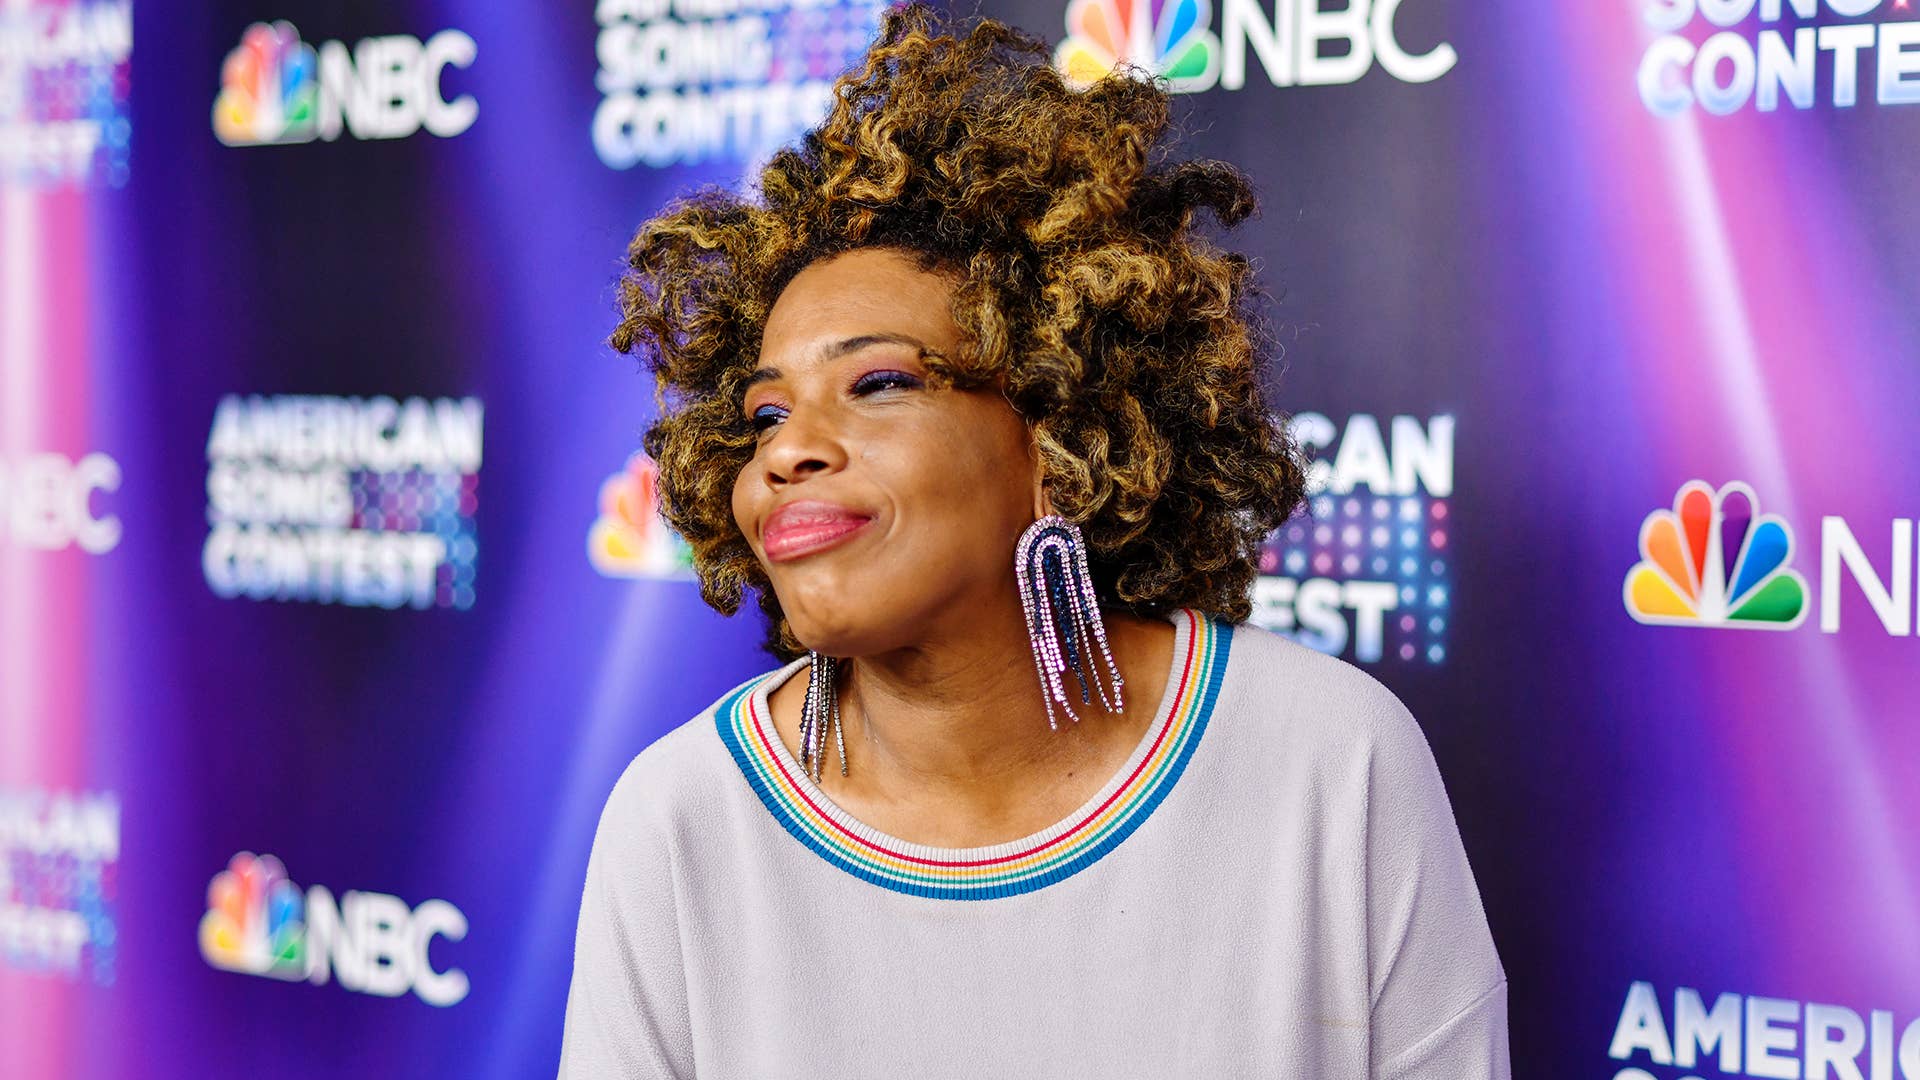 Macy Gray arrives at NBC's 'American Song Contest' Week 2 Red Carpet at Universal Studios Hollywood